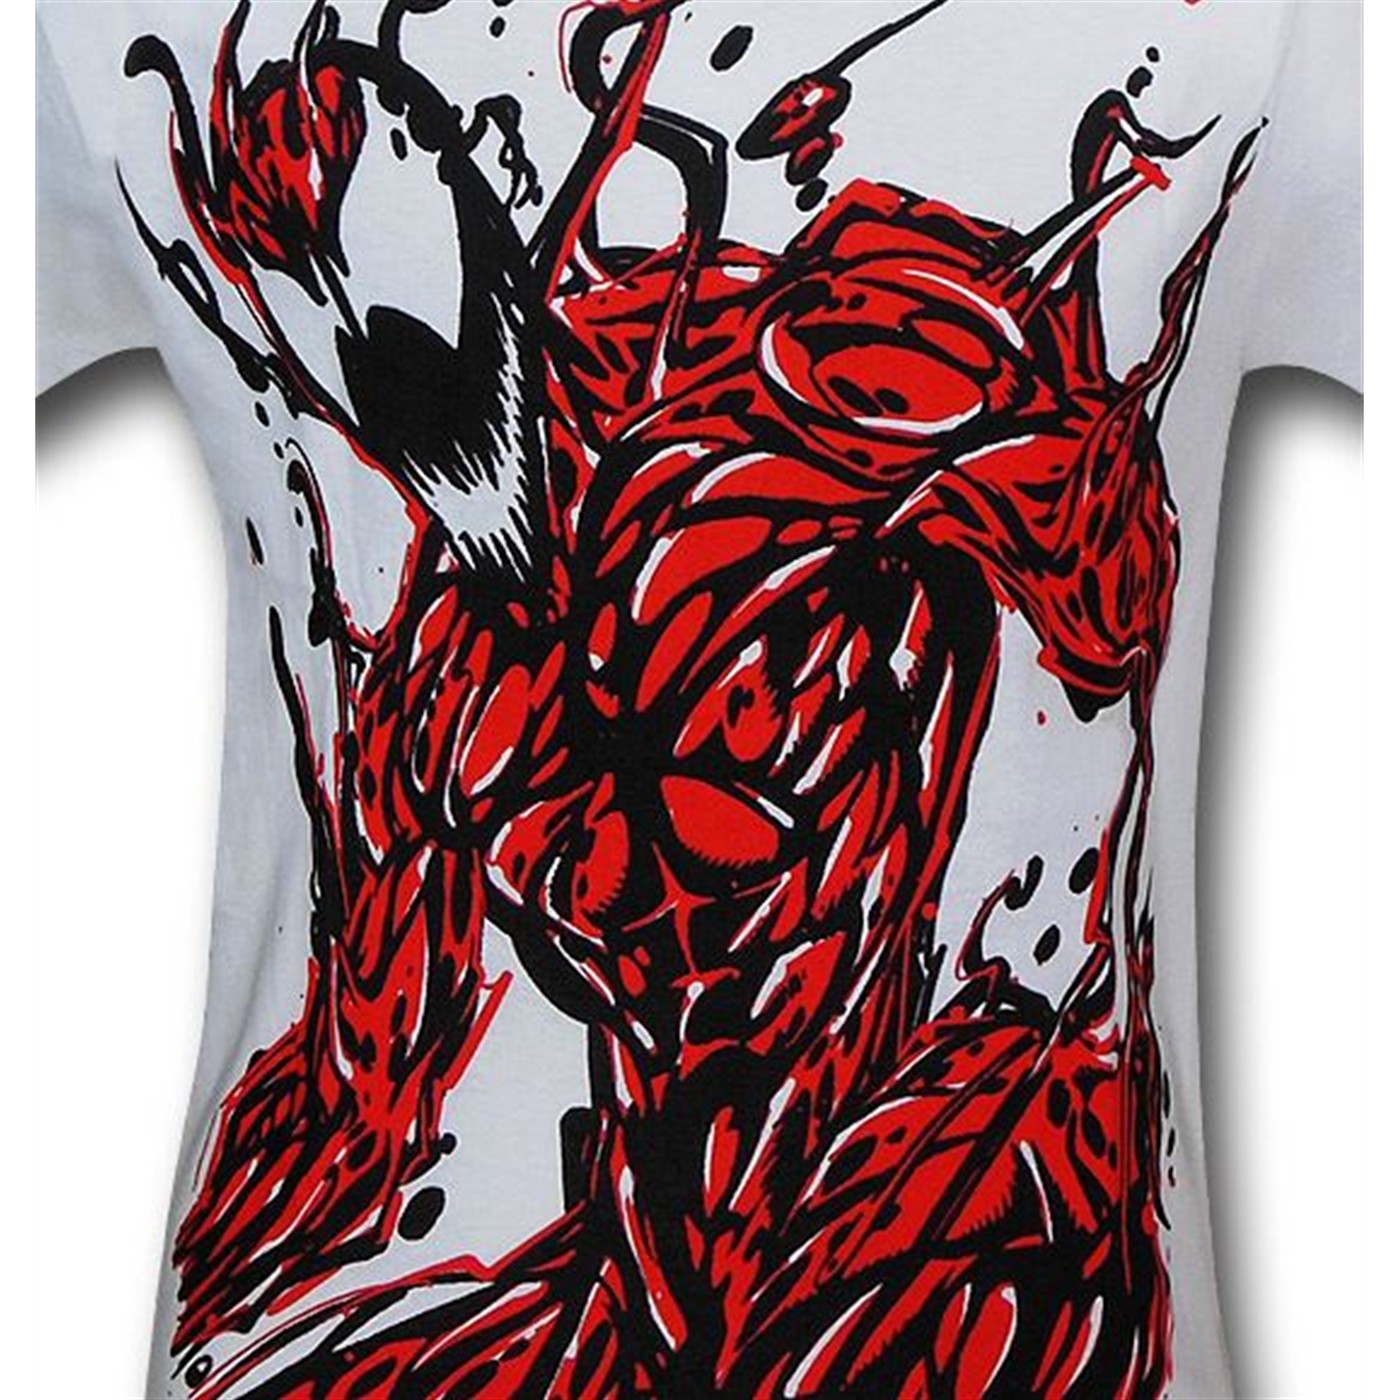 Carnage Angry Image on White T-Shirt